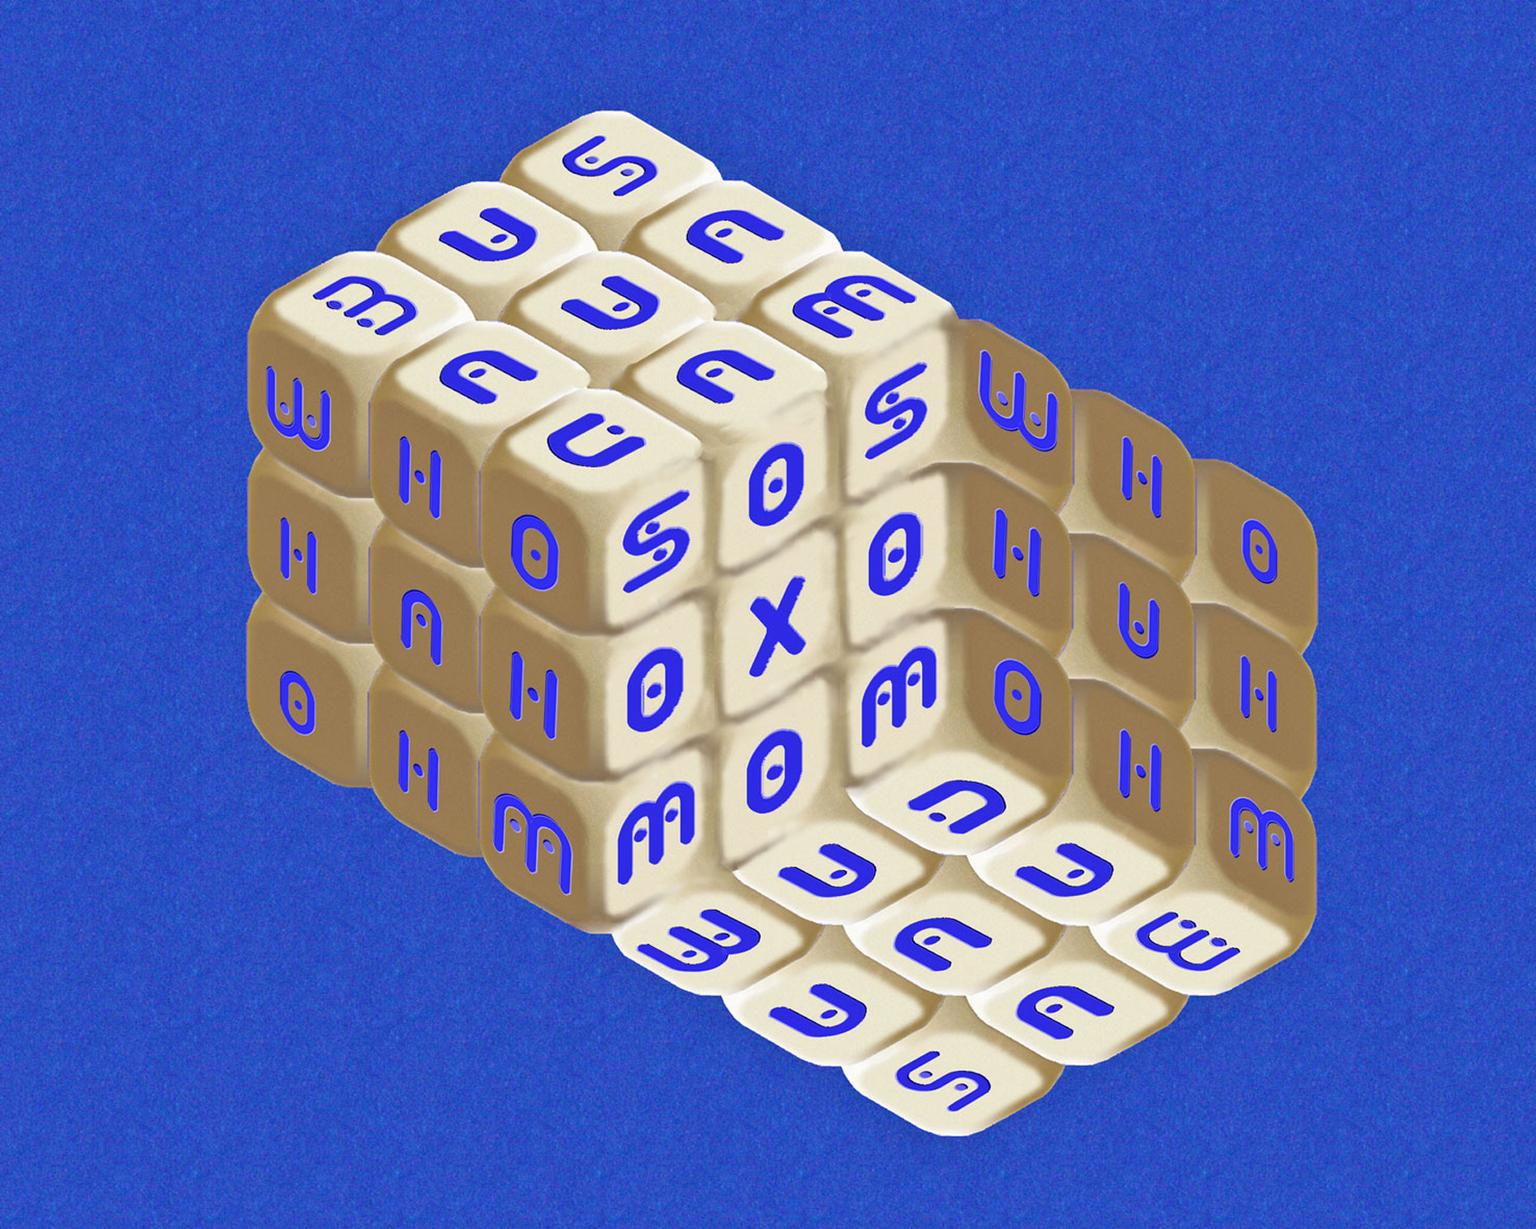 Image for entry 'Magic cubes'